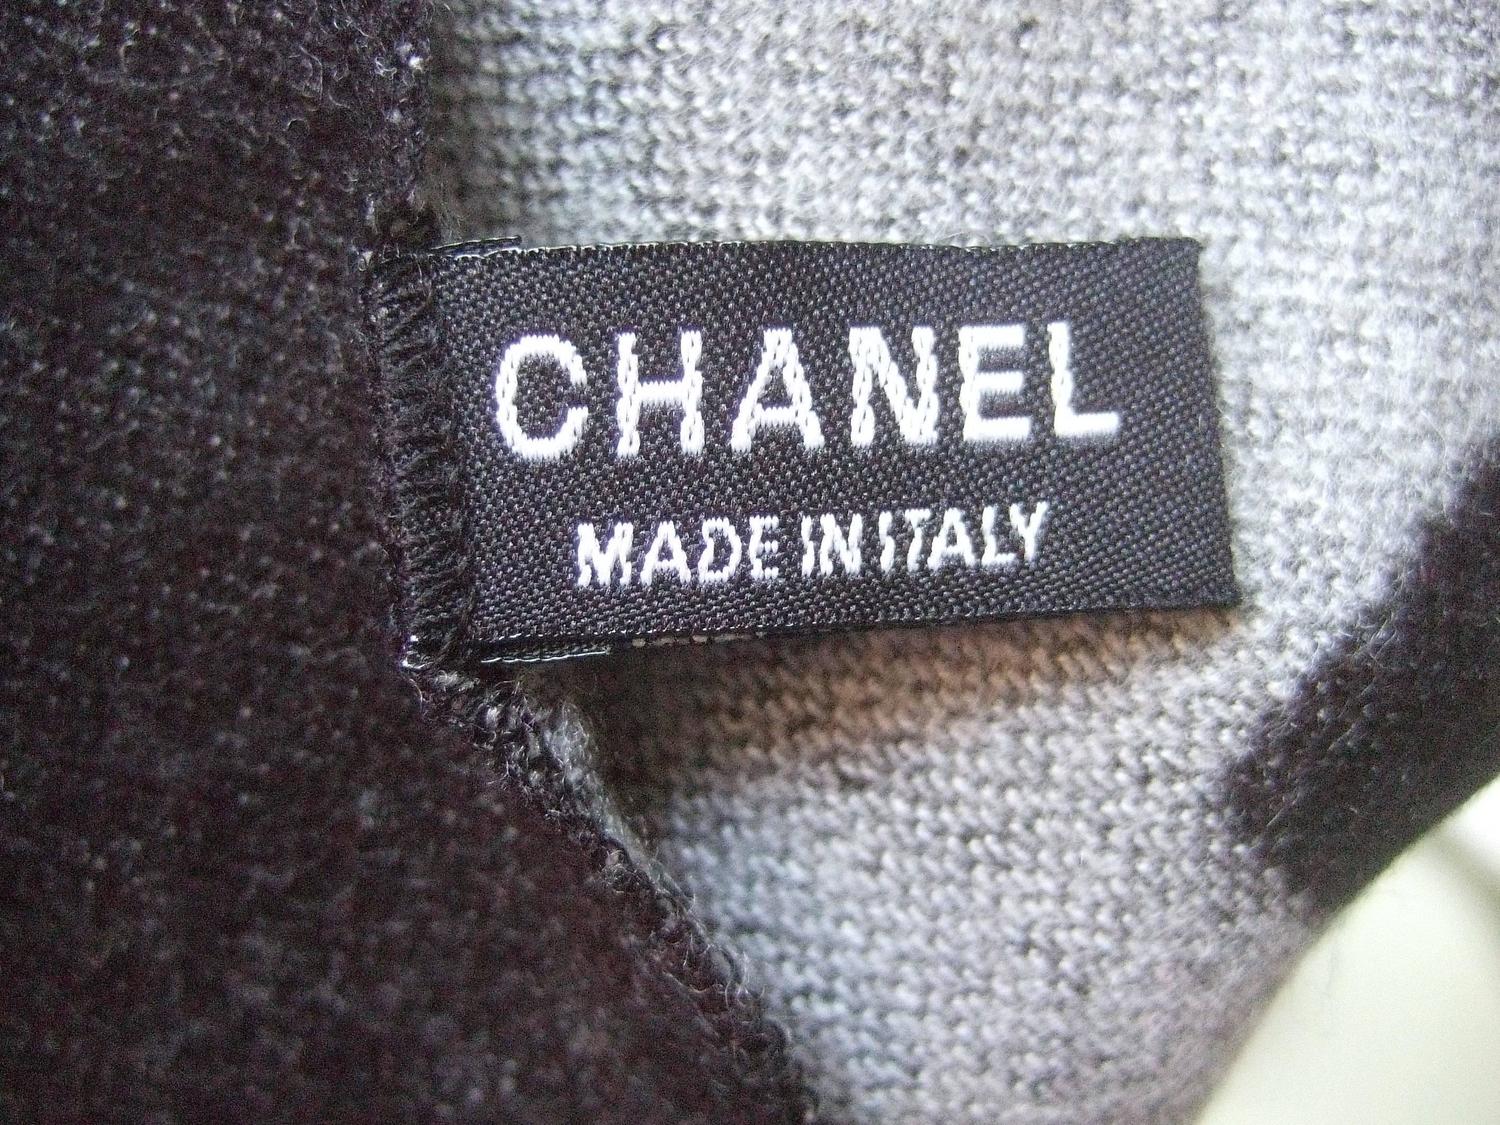 Chanel Charcoal Gray Silk Wool Blend Shawl Made in Italy at 1stdibs